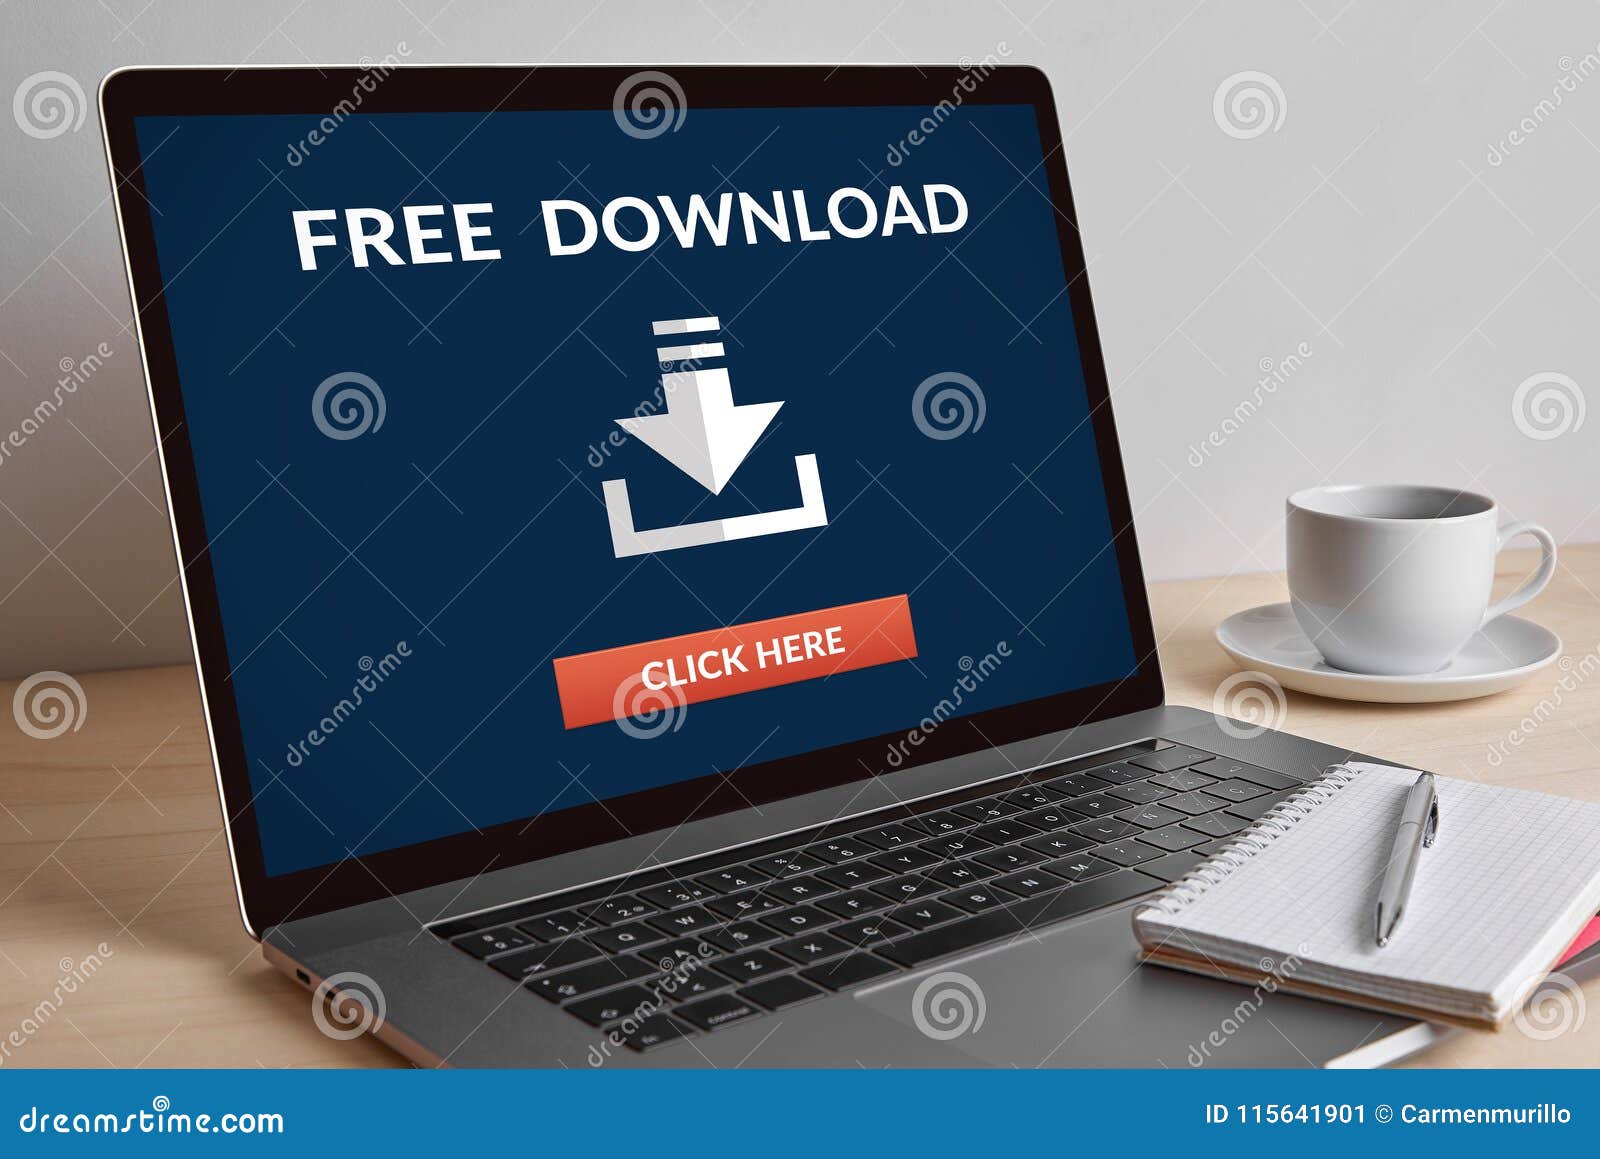 free download concept on laptop computer screen